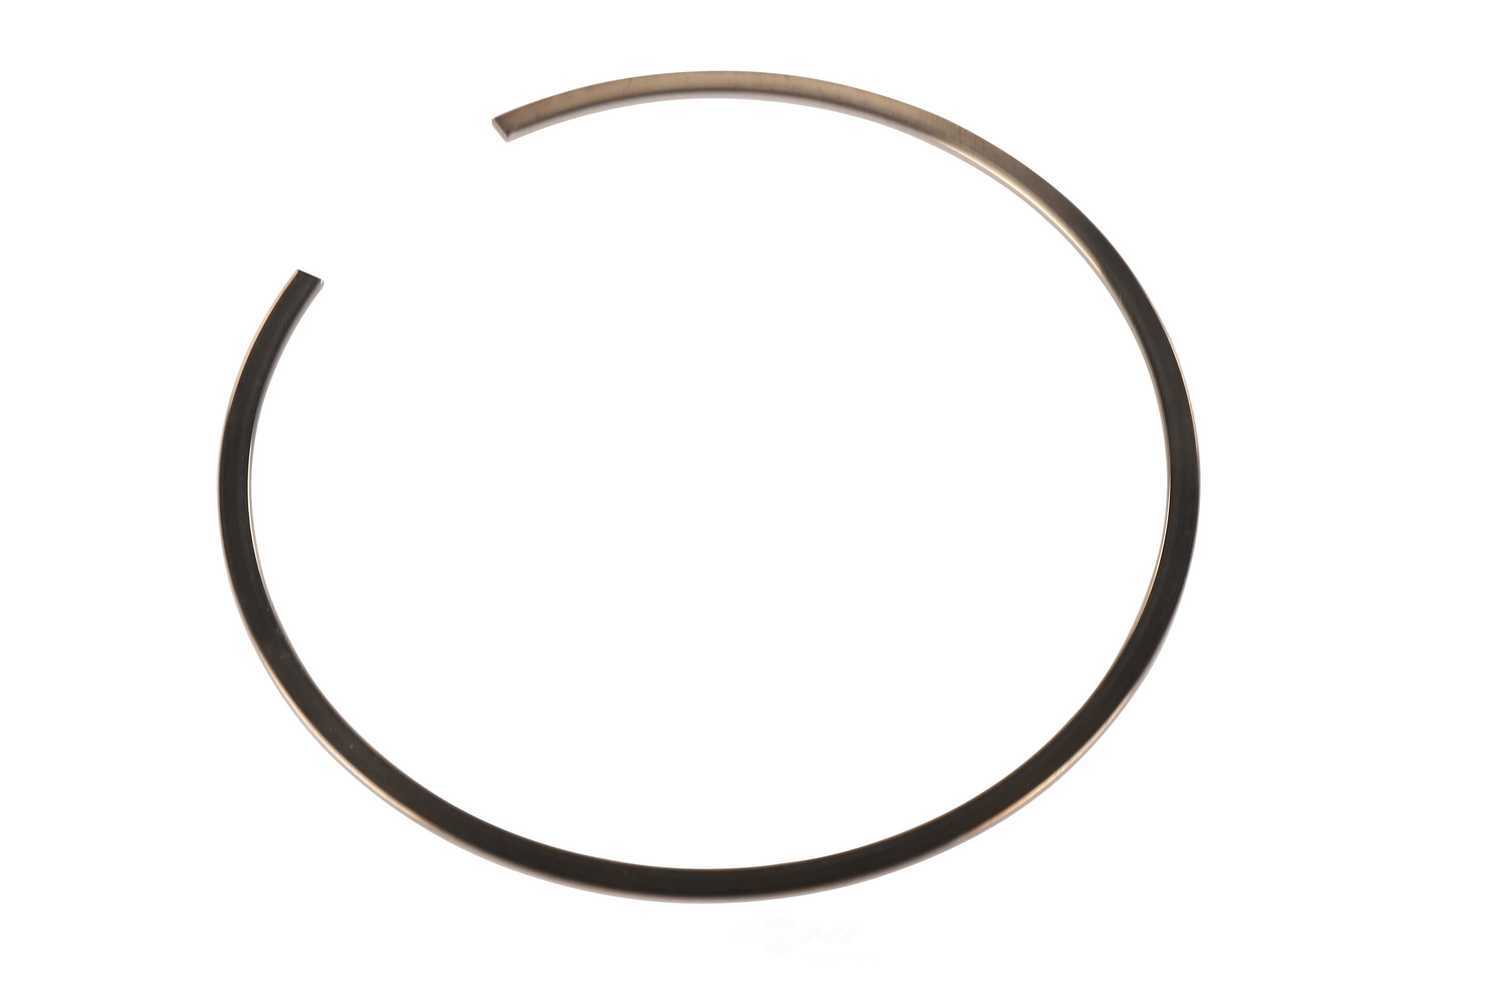 GM GENUINE PARTS - Automatic Transmission Clutch Backing Plate Retaining Ring - GMP 24231669